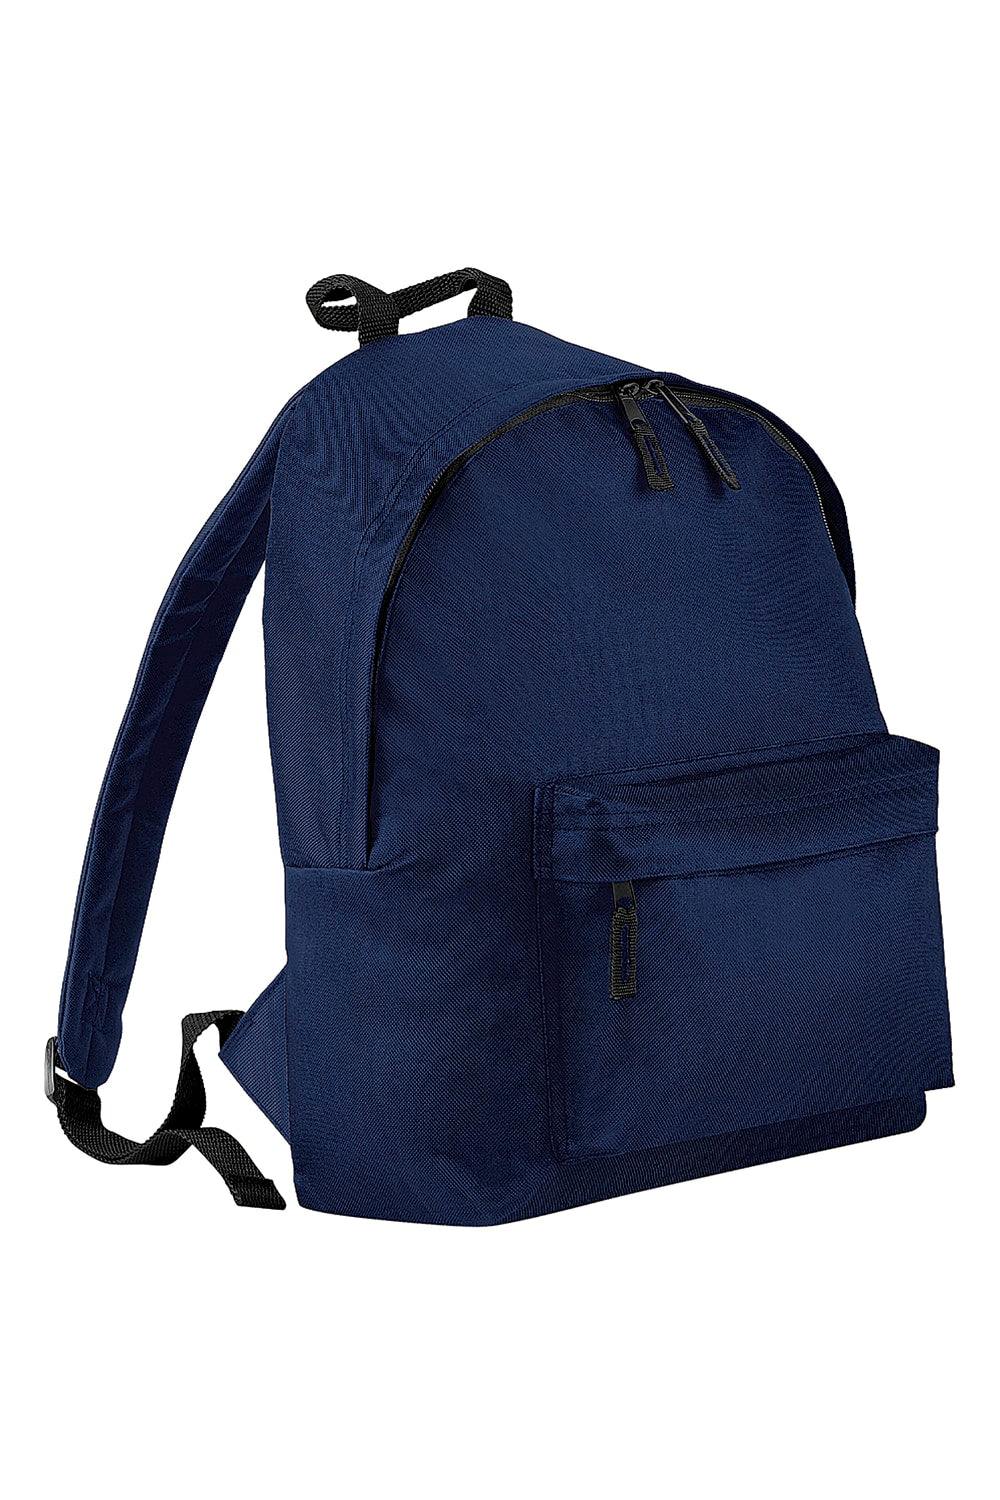 Rucksack Fashion Backpack 18 Liters - French Navy